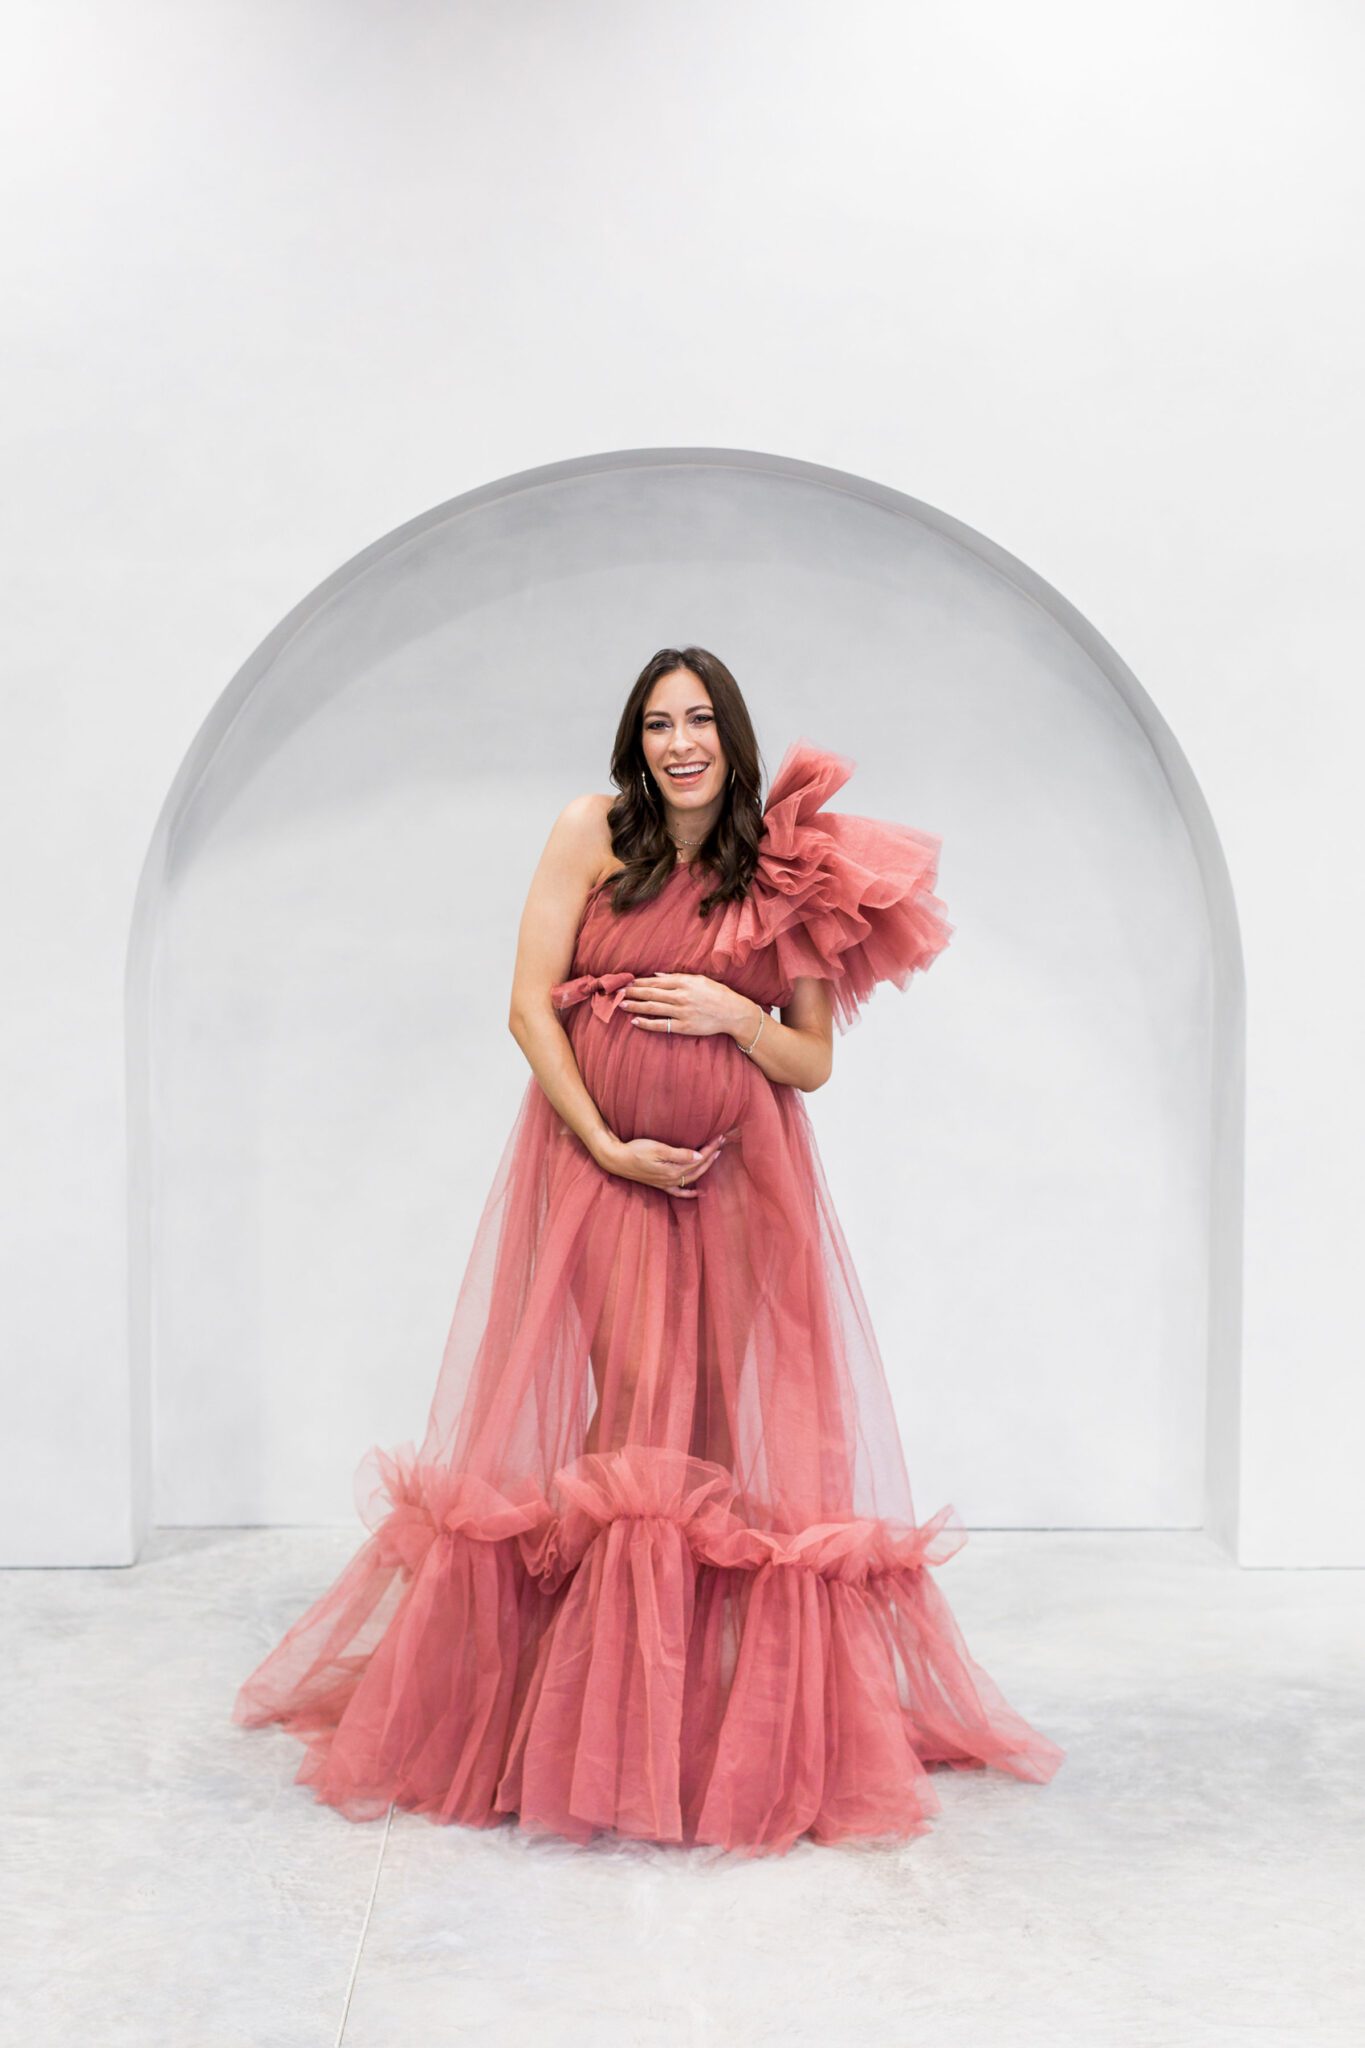 7 Maternity Shoot Outfit Ideas